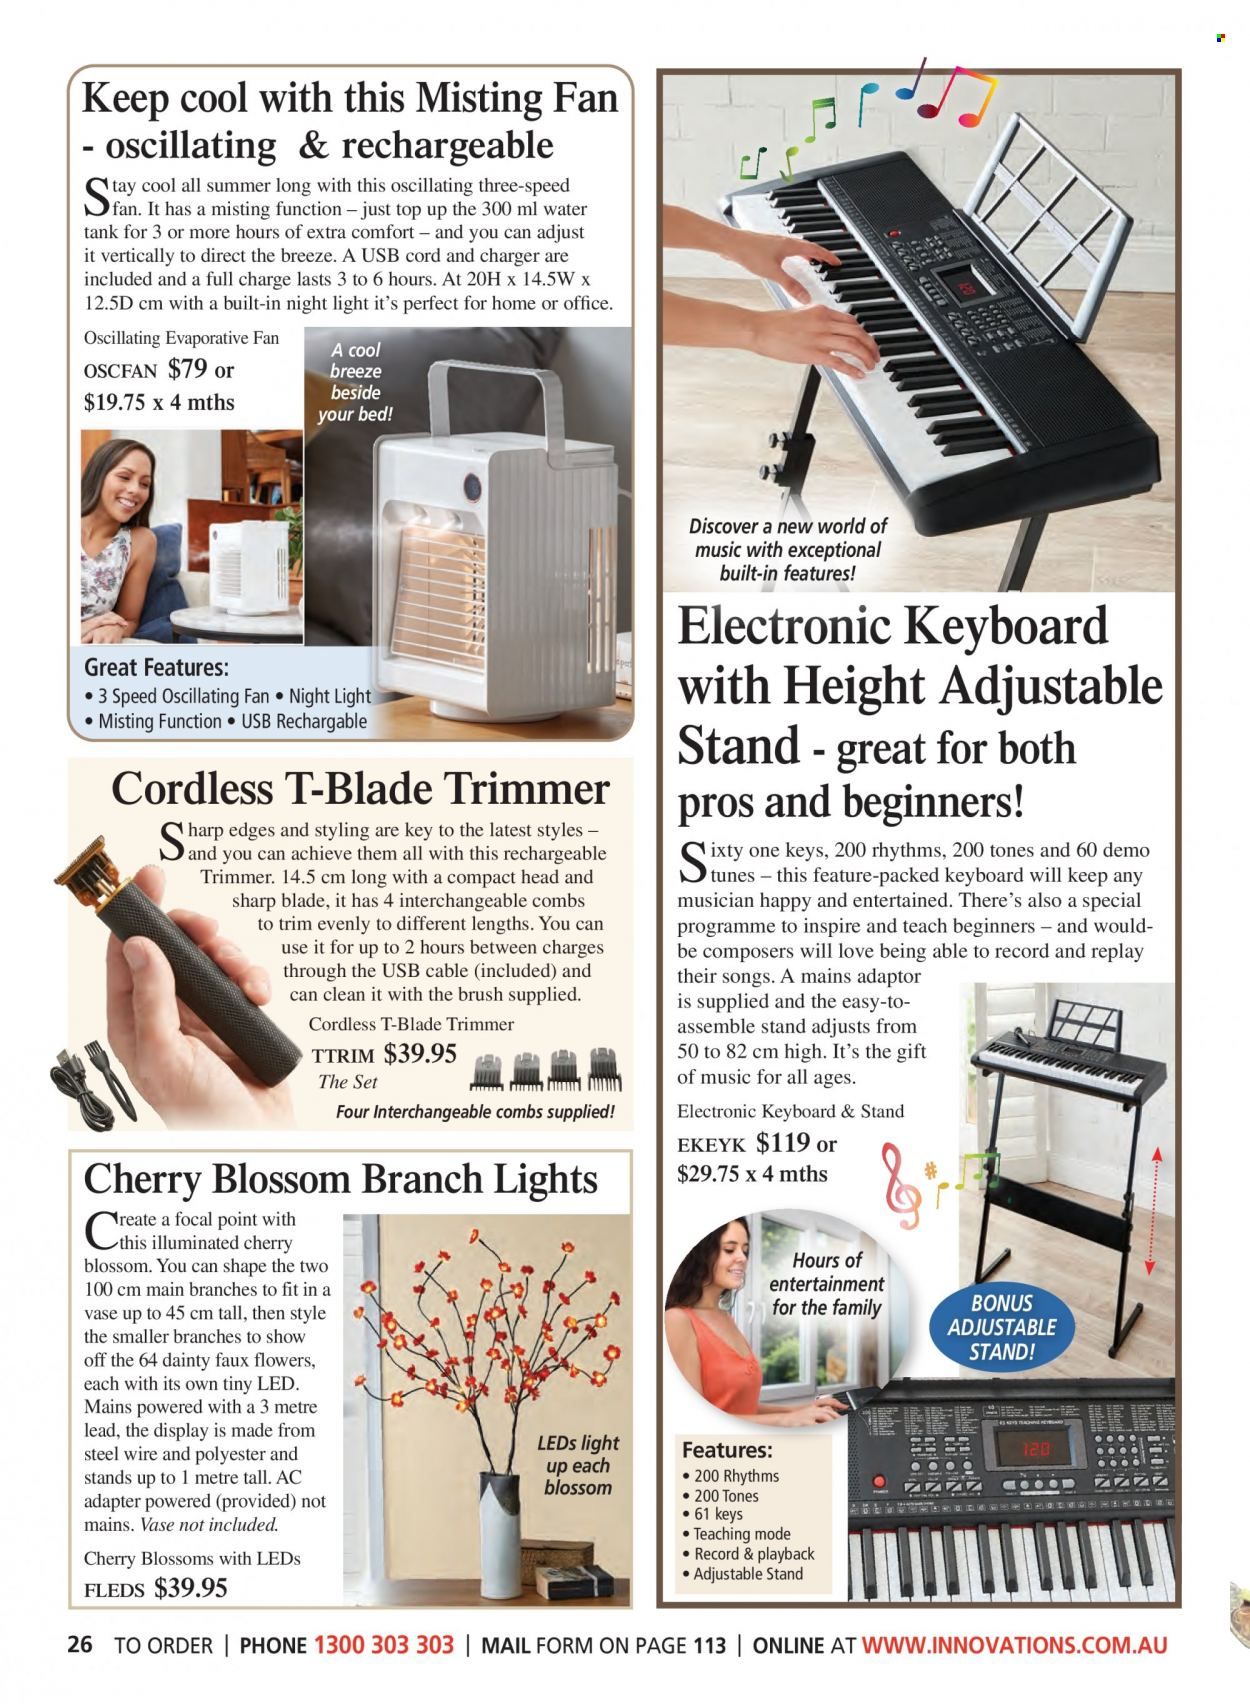 thumbnail - Innovations Catalogue - Sales products - Sharp, keyboard, tank, adapter, stand fan, trimmer. Page 26.